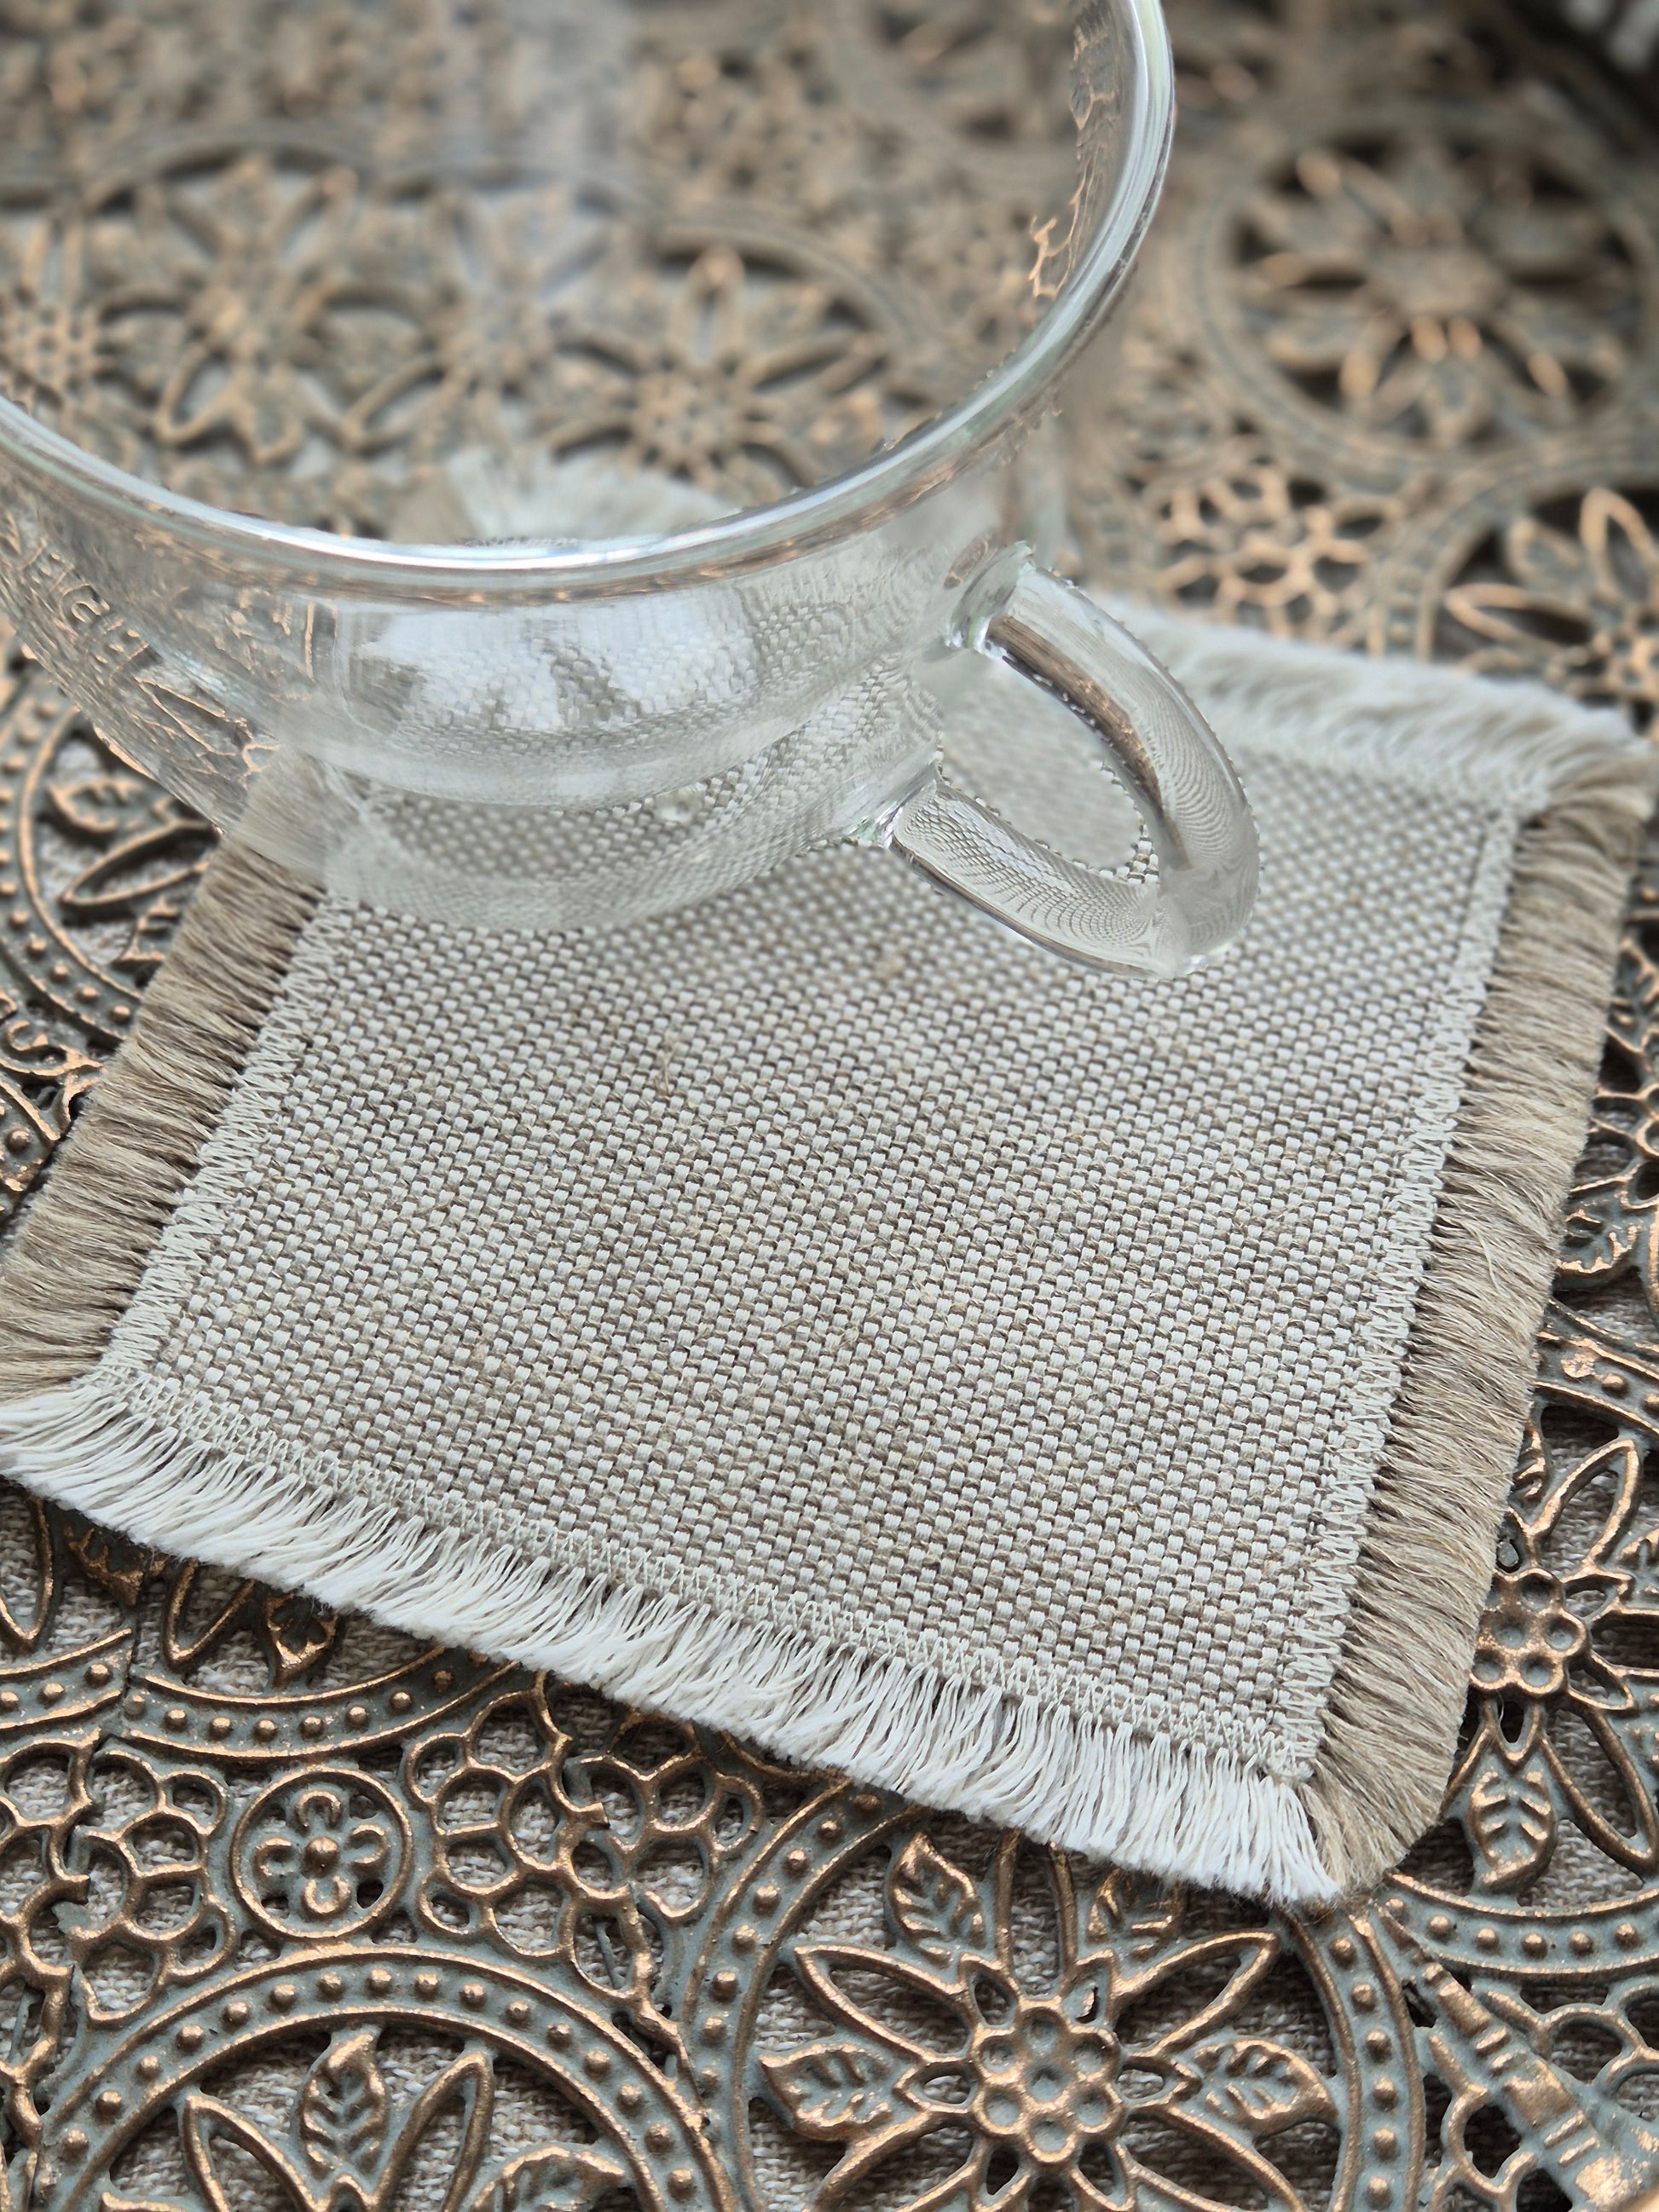 Sara oatmeal pure linen textured coasters with hand brushed edges.